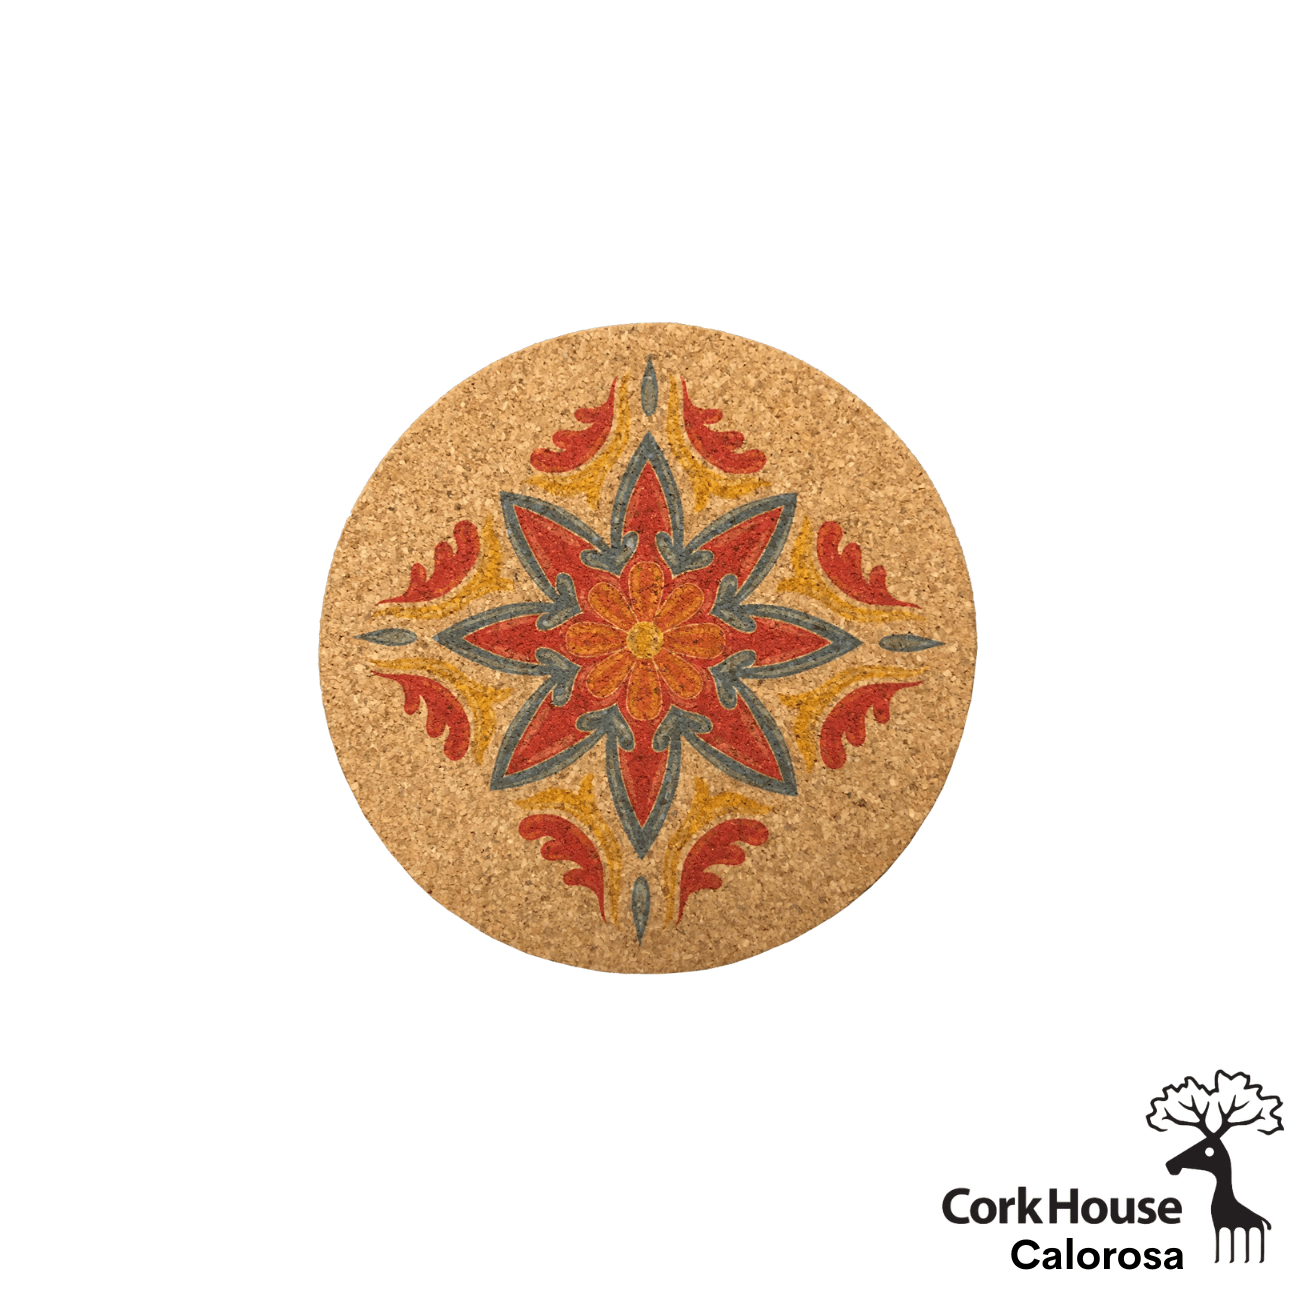 The calorosa coaster features an 8 point red and orange flower with green outlines in the middle of the coasters and red leaves around the flower to create a diamond. 